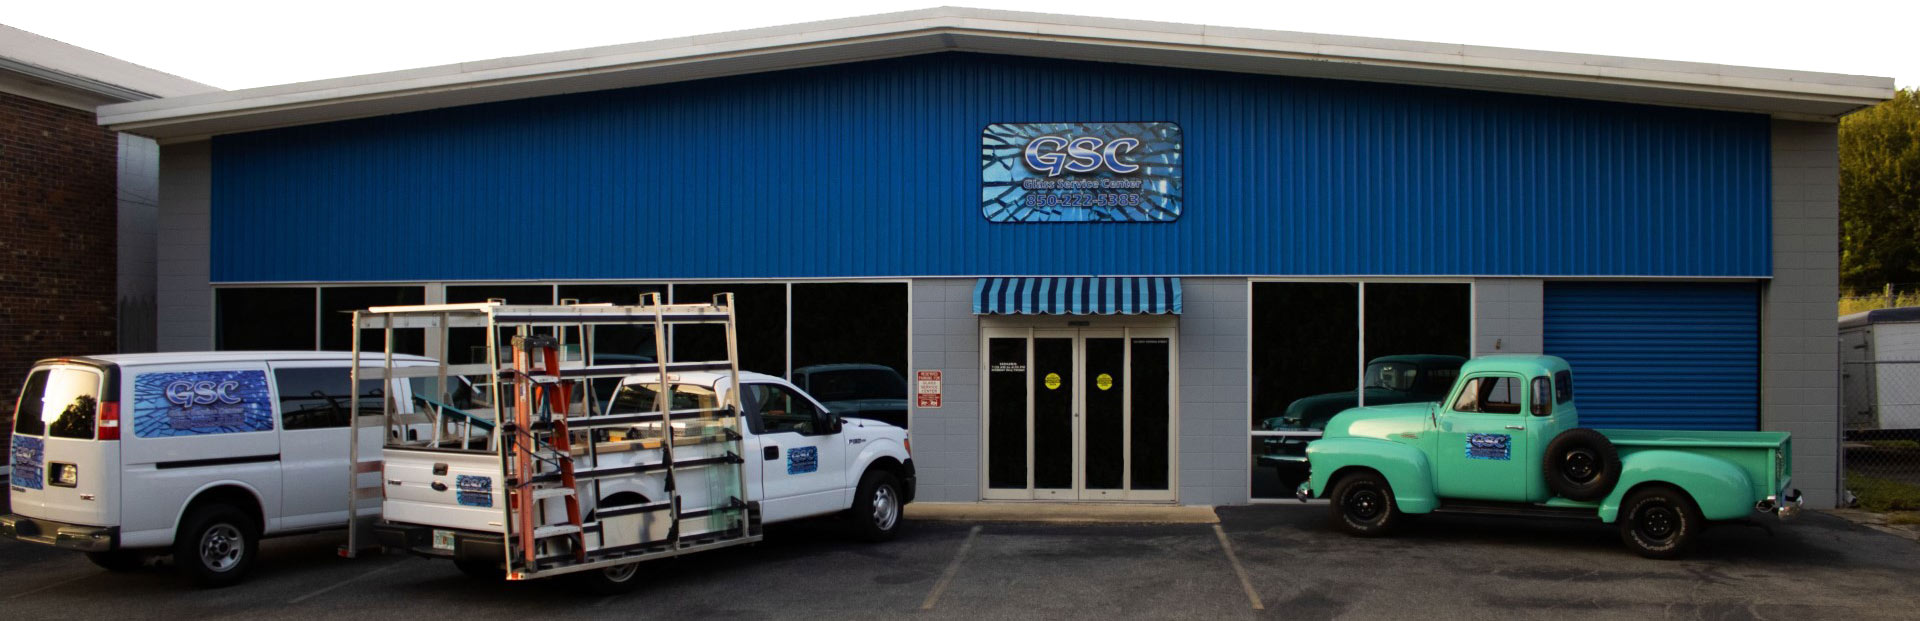 Glass Service Center of Tallahassee business location with company trucks.